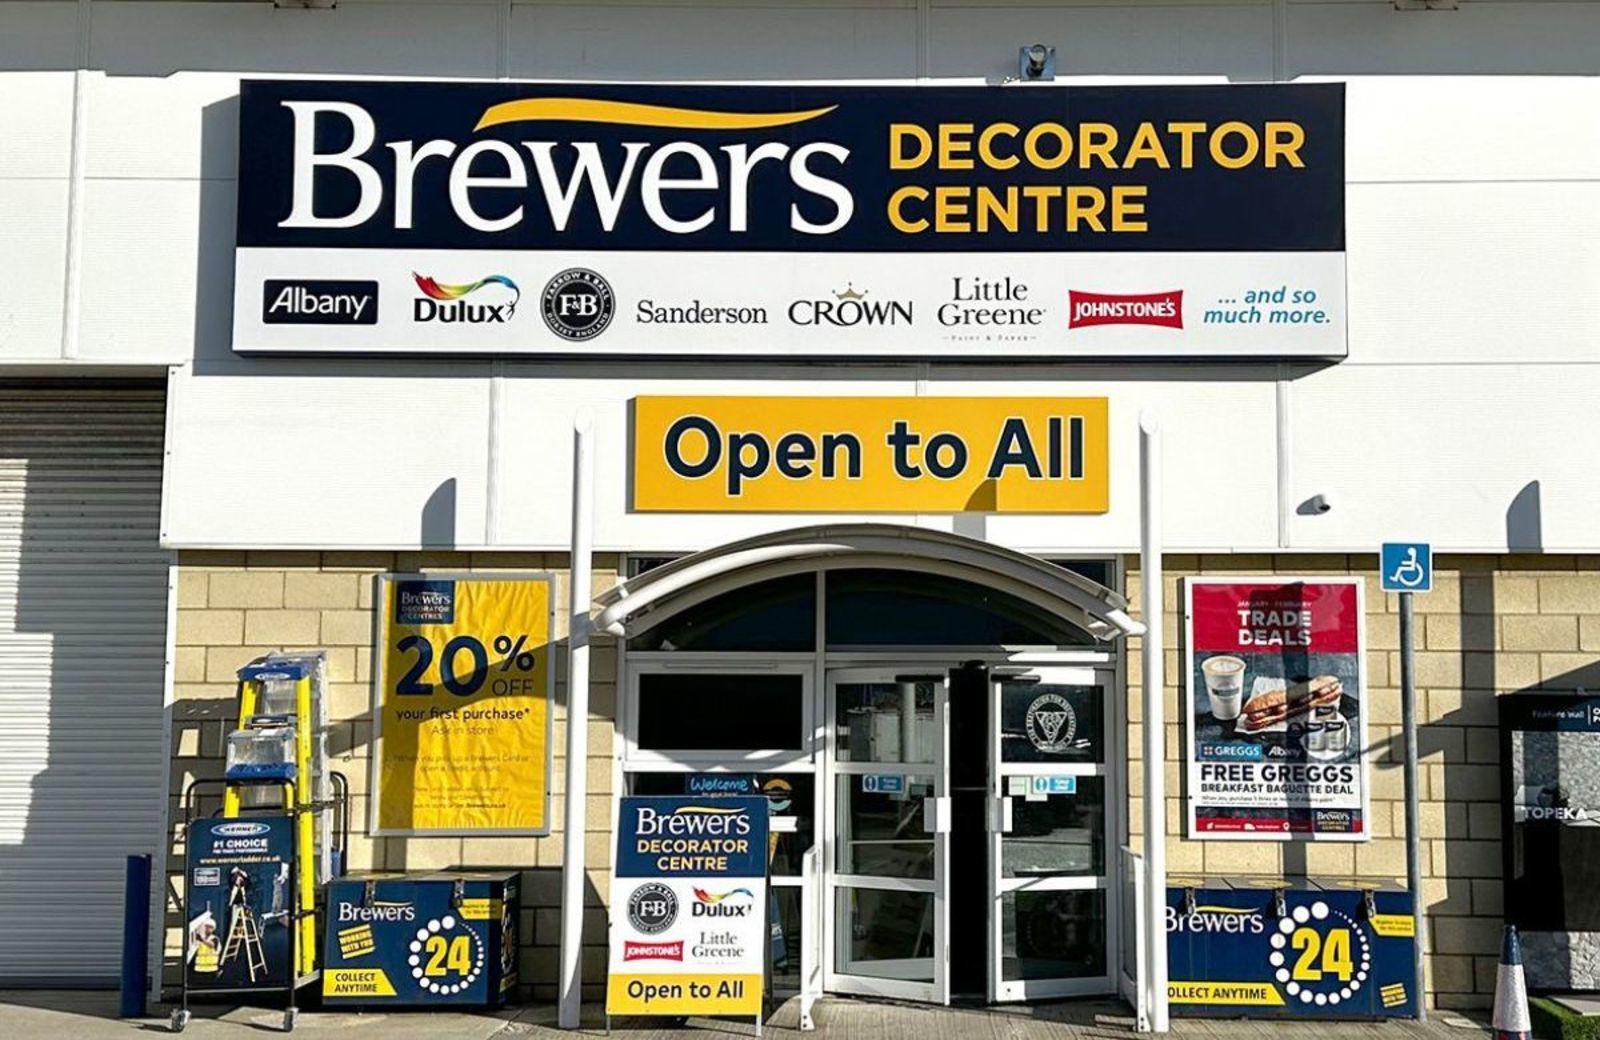 Brewers Decorator Centres Southsea 02392 821611